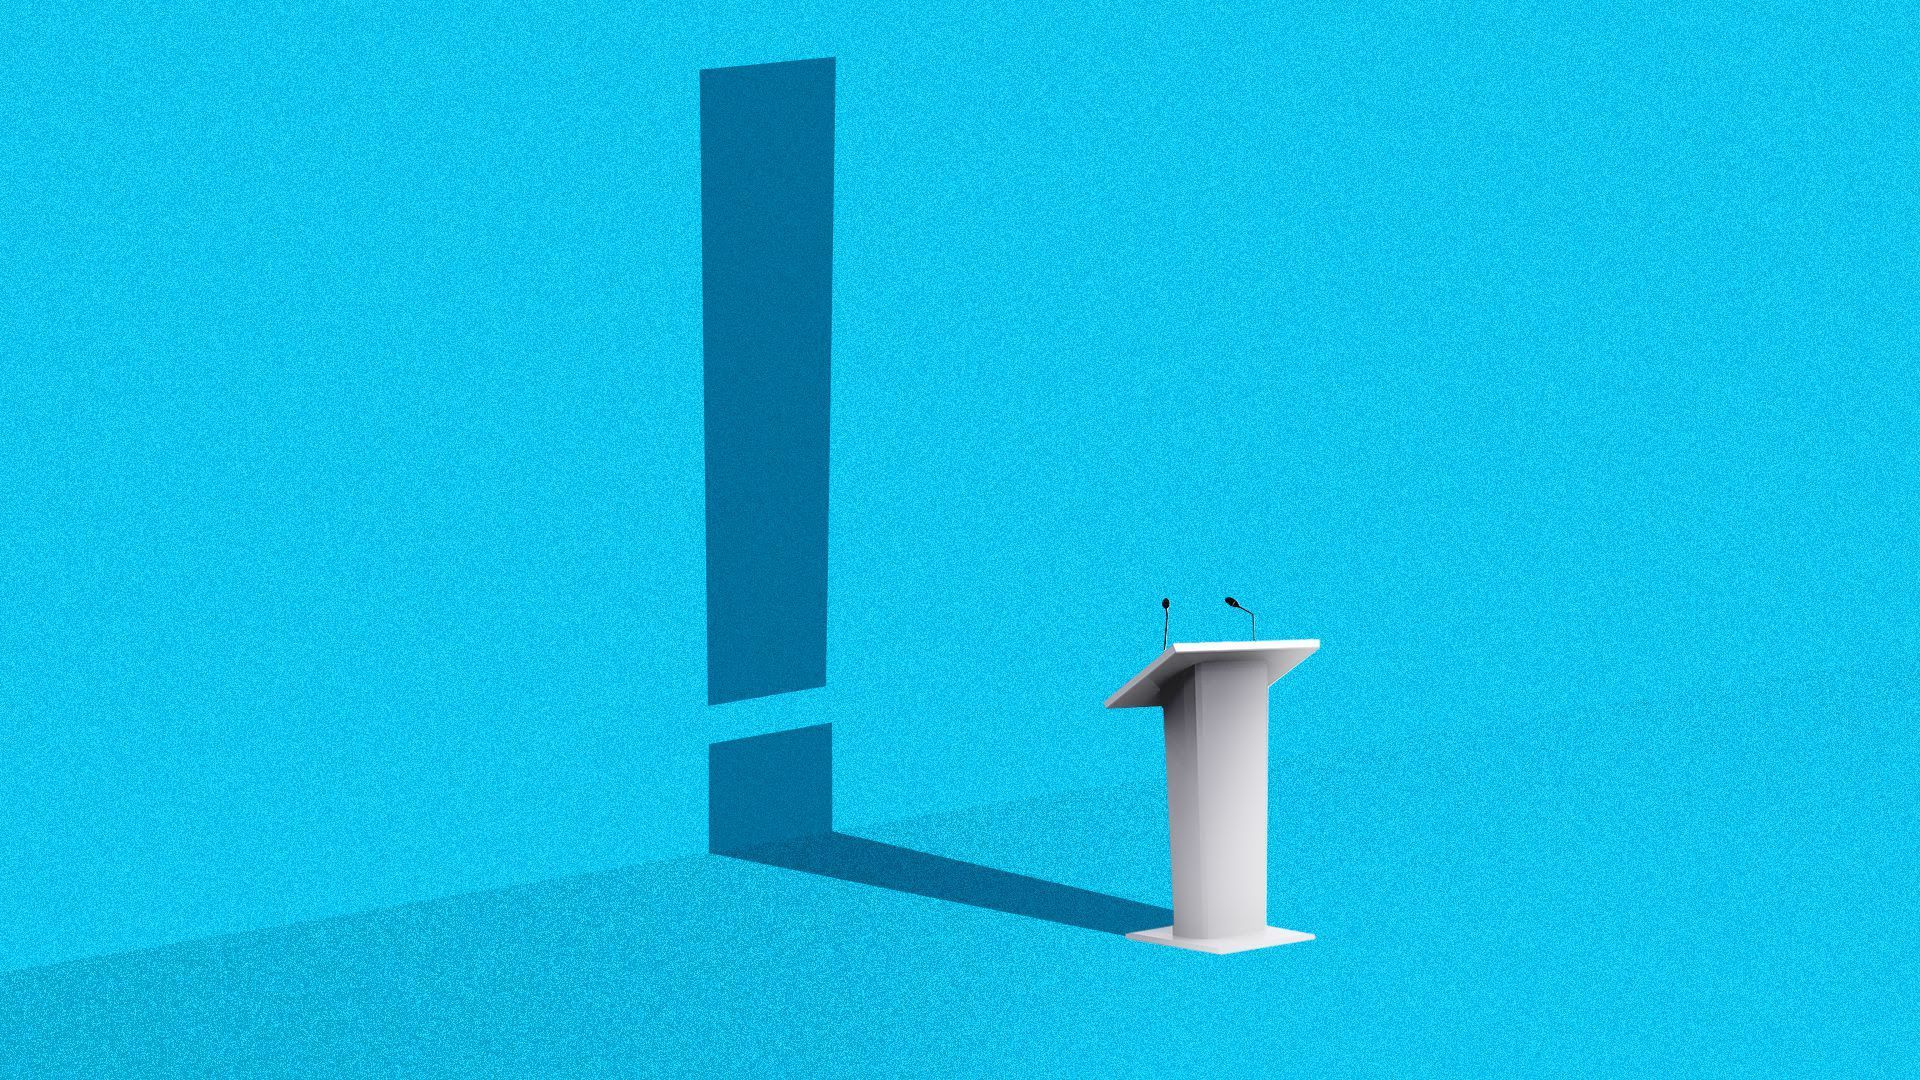 A debate lectern with the shadow of an exclamation point behind it